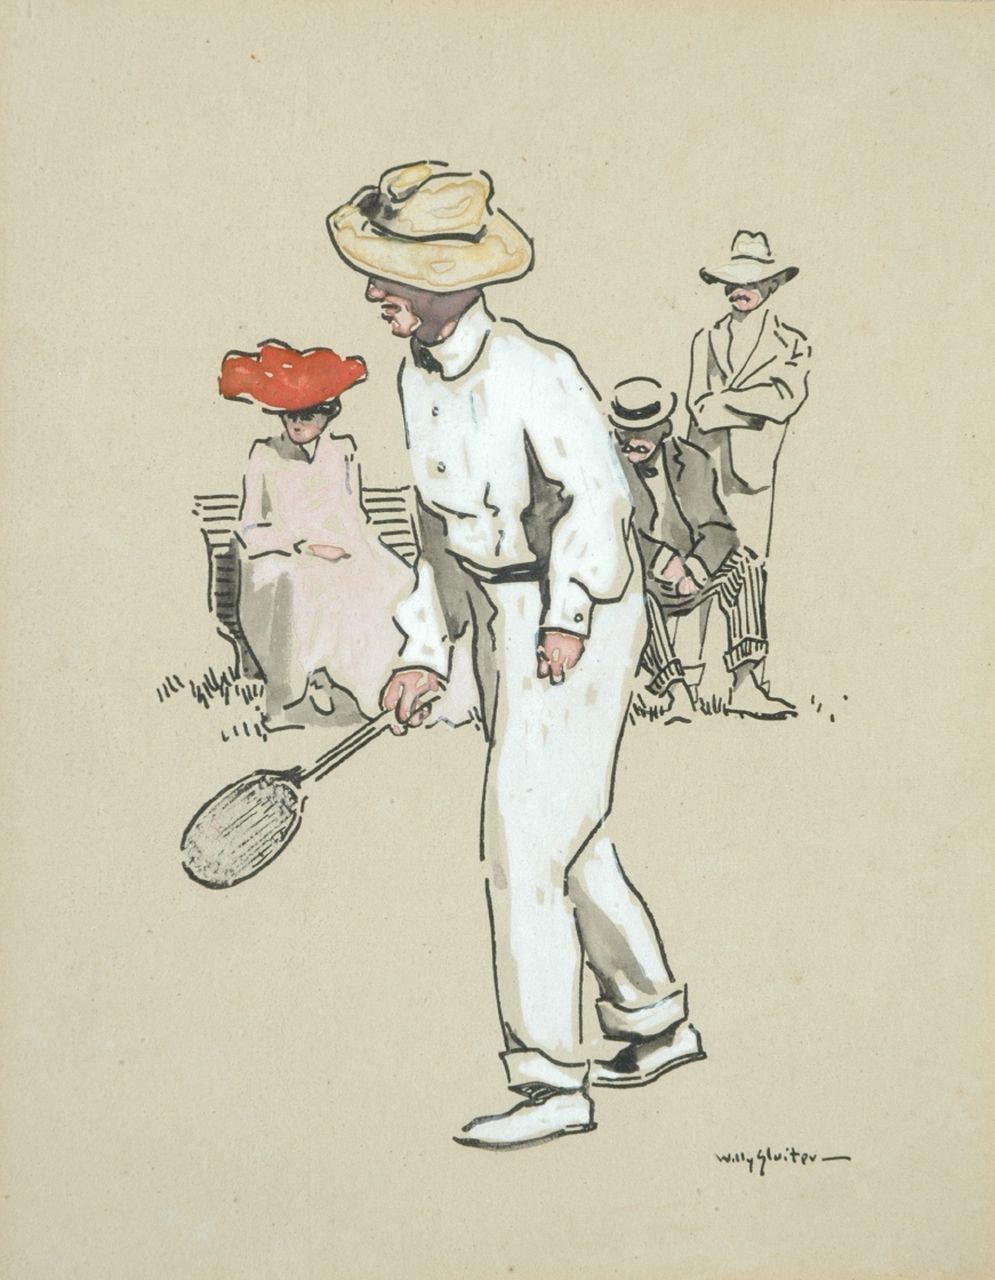 Sluiter J.W.  | Jan Willem 'Willy' Sluiter, The tennis player, ink, chalk and watercolour on paper 27.0 x 21.0 cm, signed l.r.